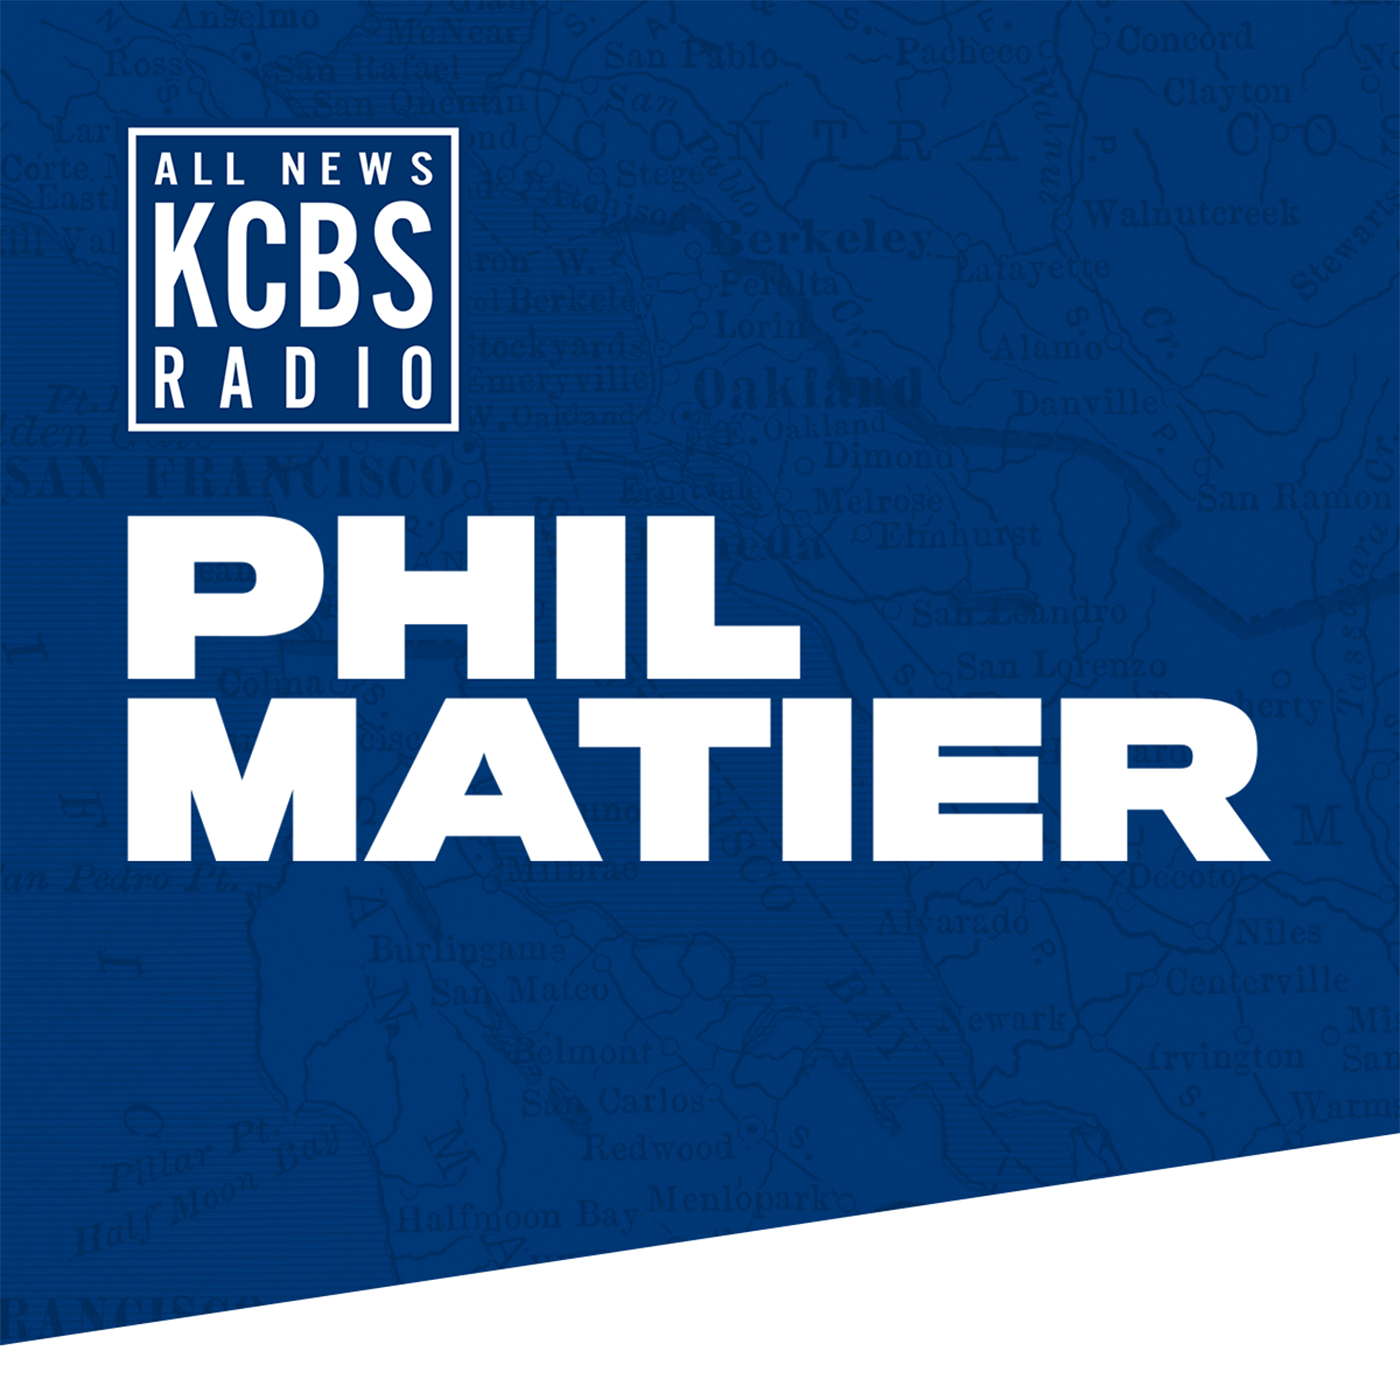 Phil Matier: Breed says Board of Supervisors 'catering to one specific audience'